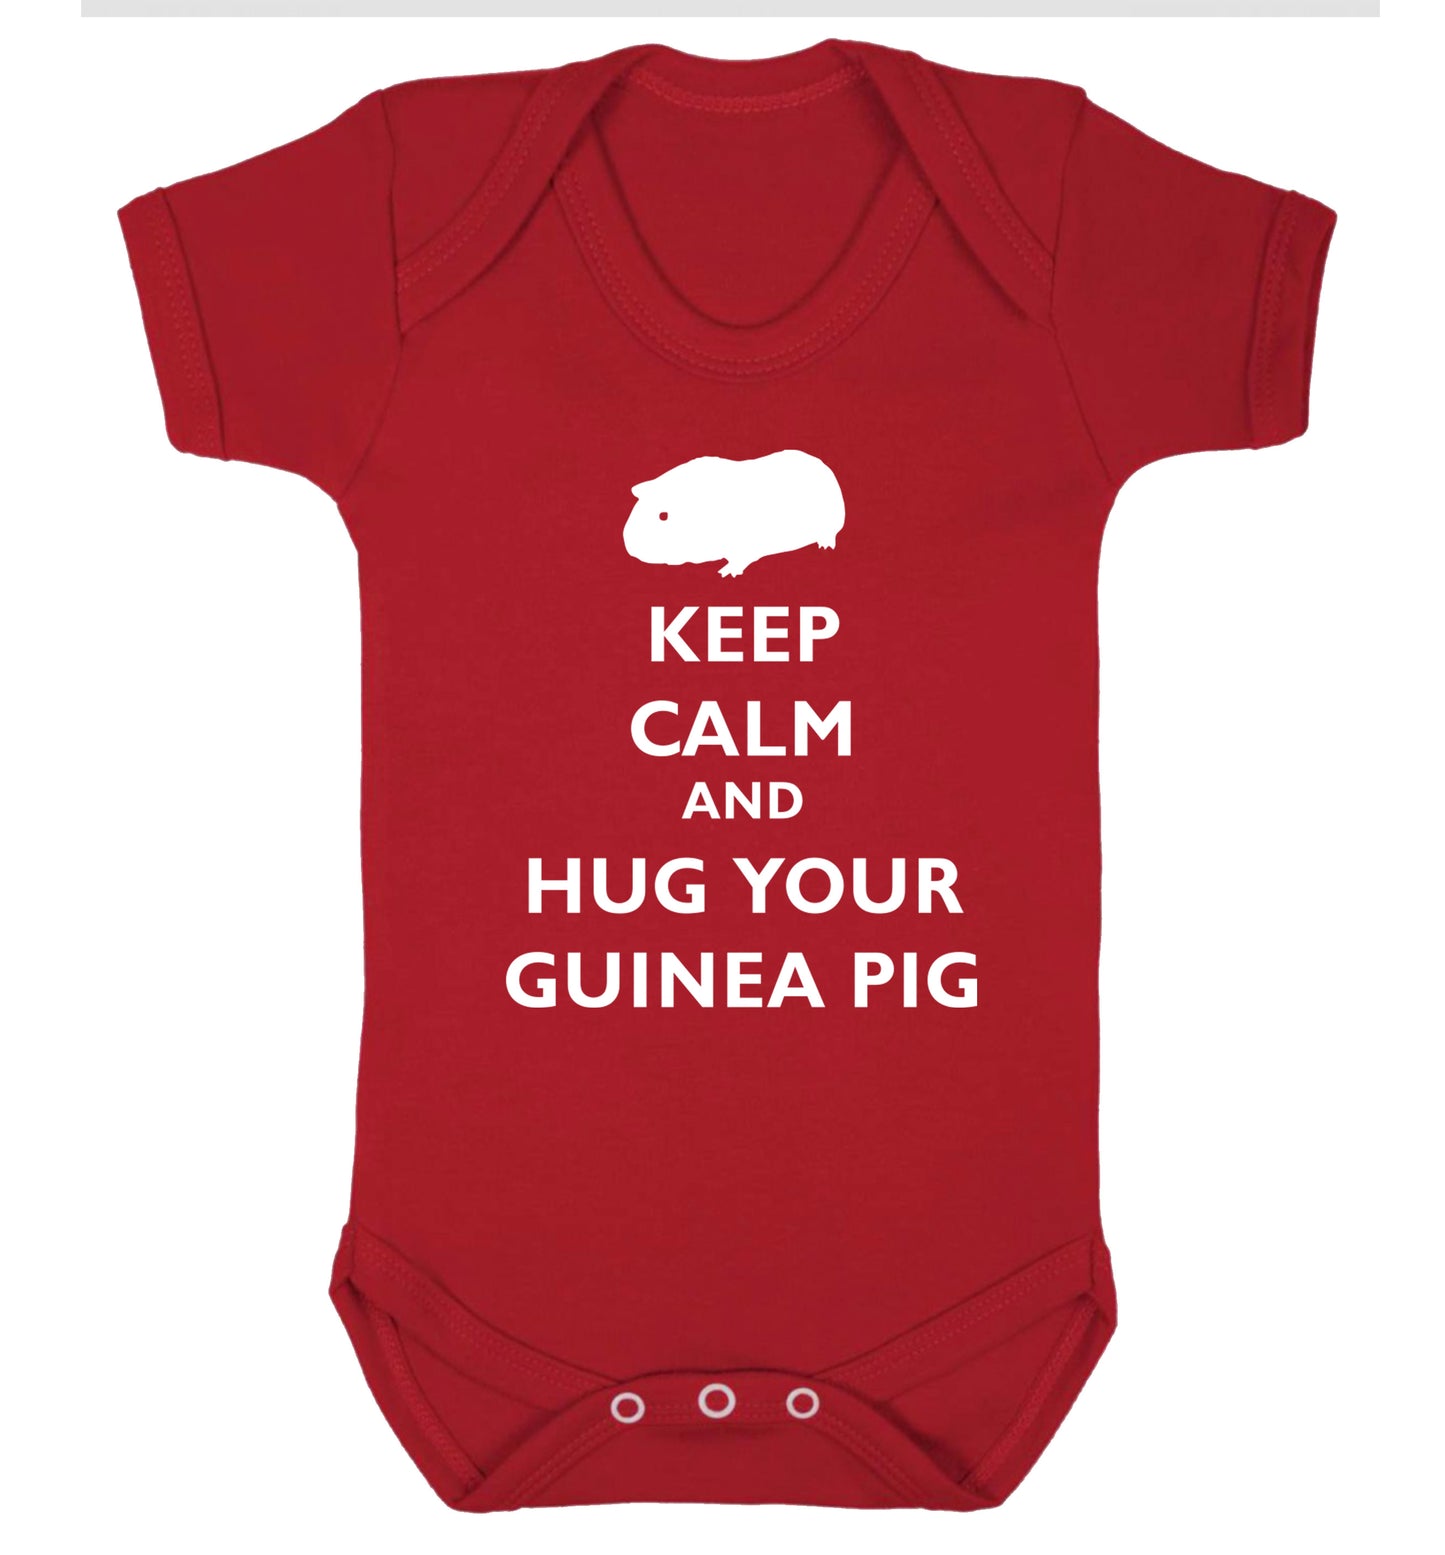 Keep calm and hug your guineapig Baby Vest red 18-24 months